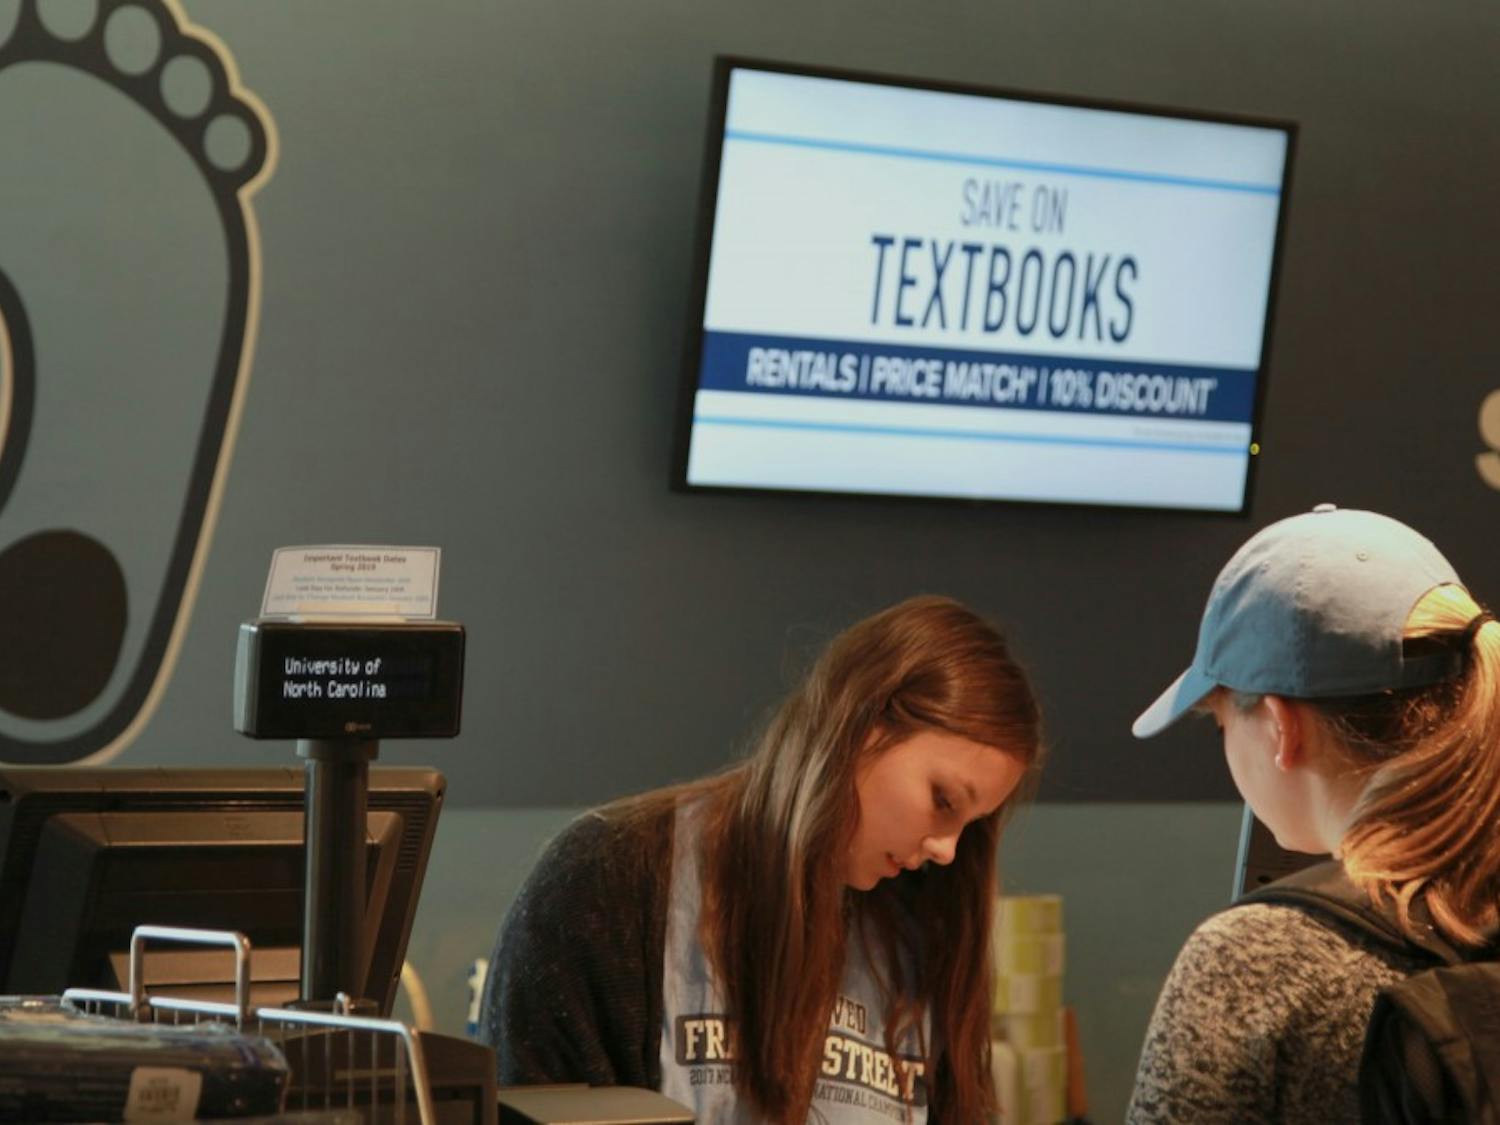 "Railey Pitts, a sophomore studying political science and business, helps another student with her textbooks on the lower level of UNC Student Stores. "